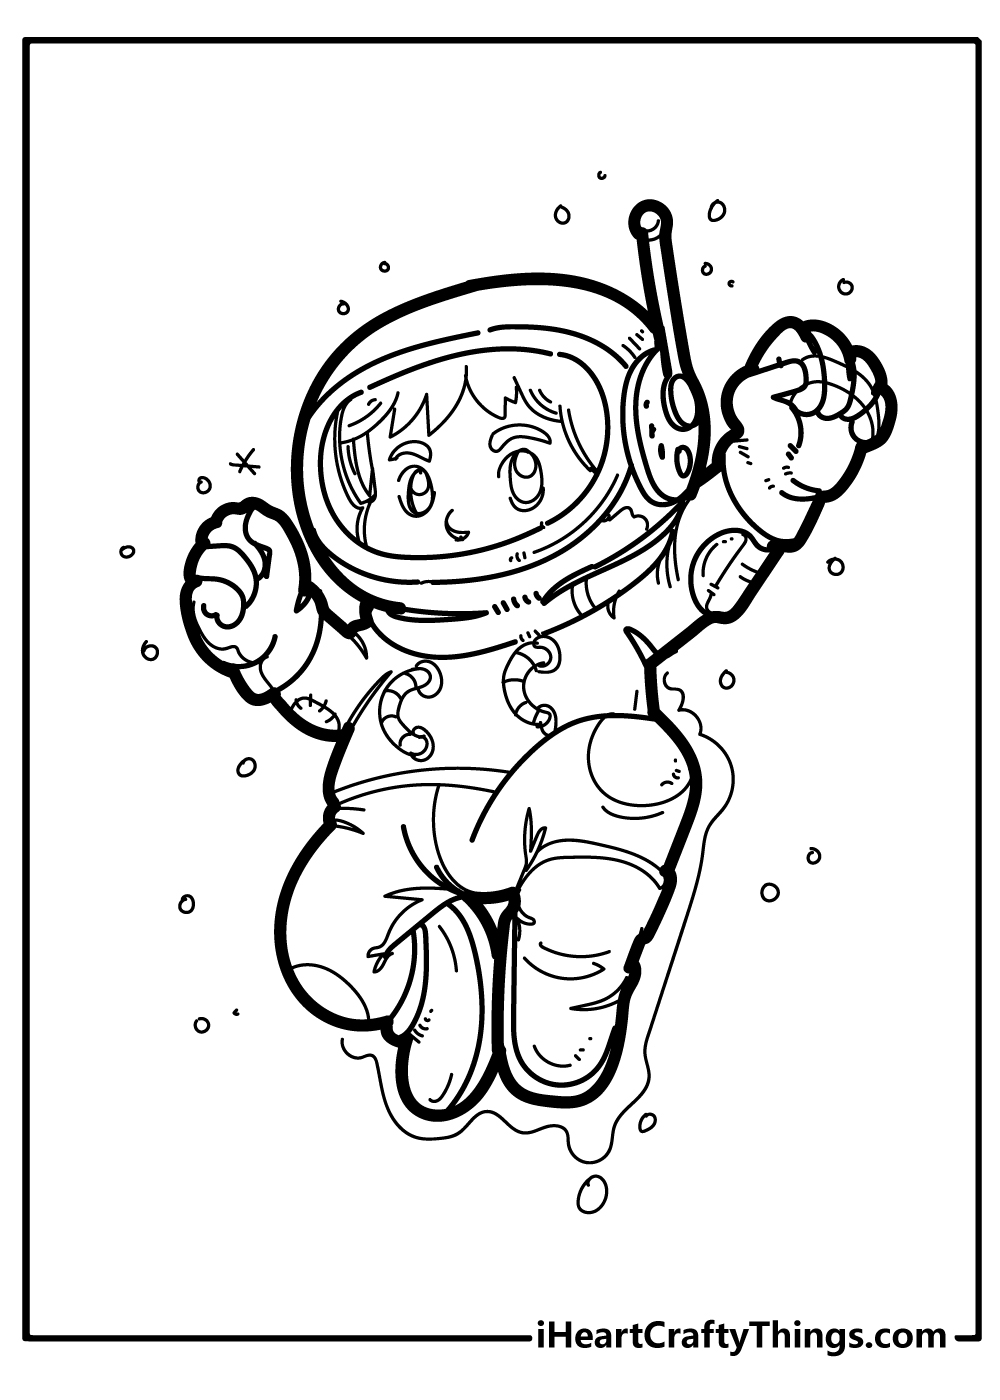 Astronaut Coloring Pages free pdf download